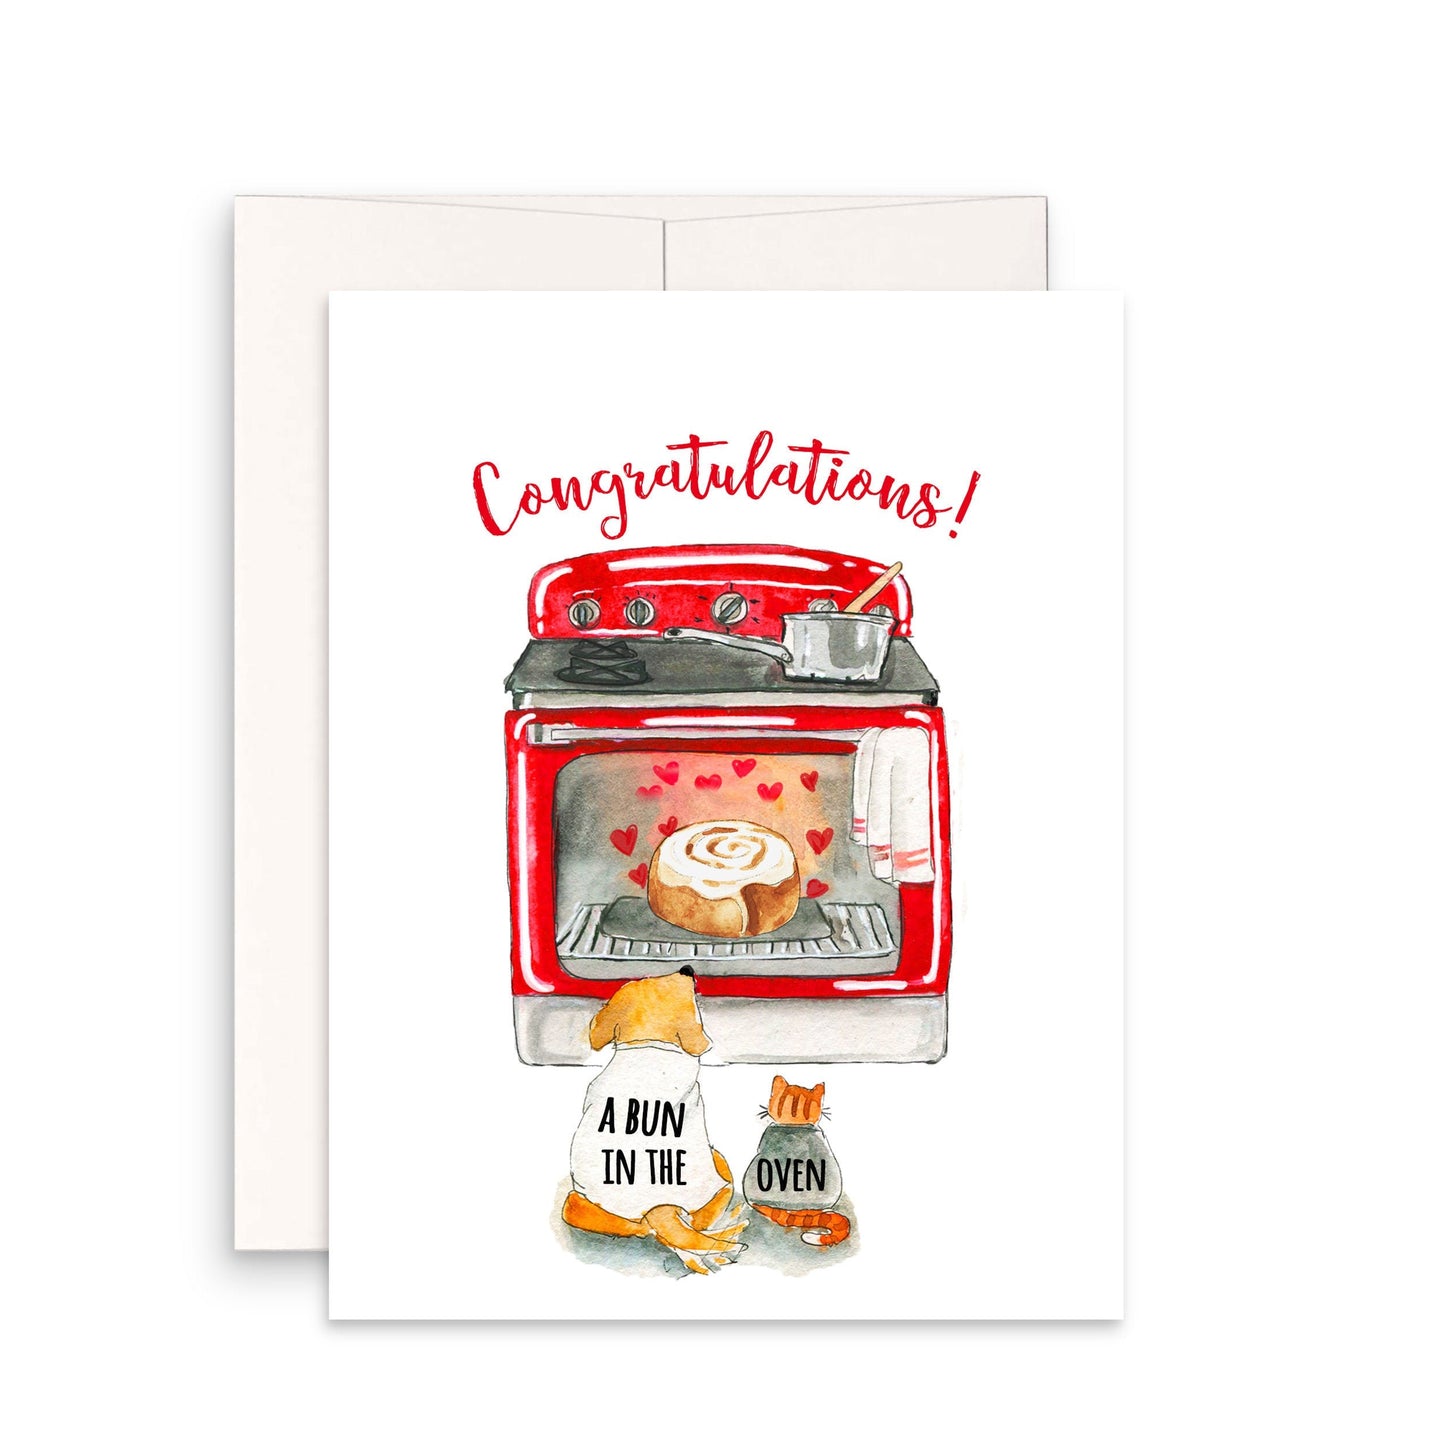 Congratulations Pregnancy Card Funny - Bun In the Oven Baby Shower Cards